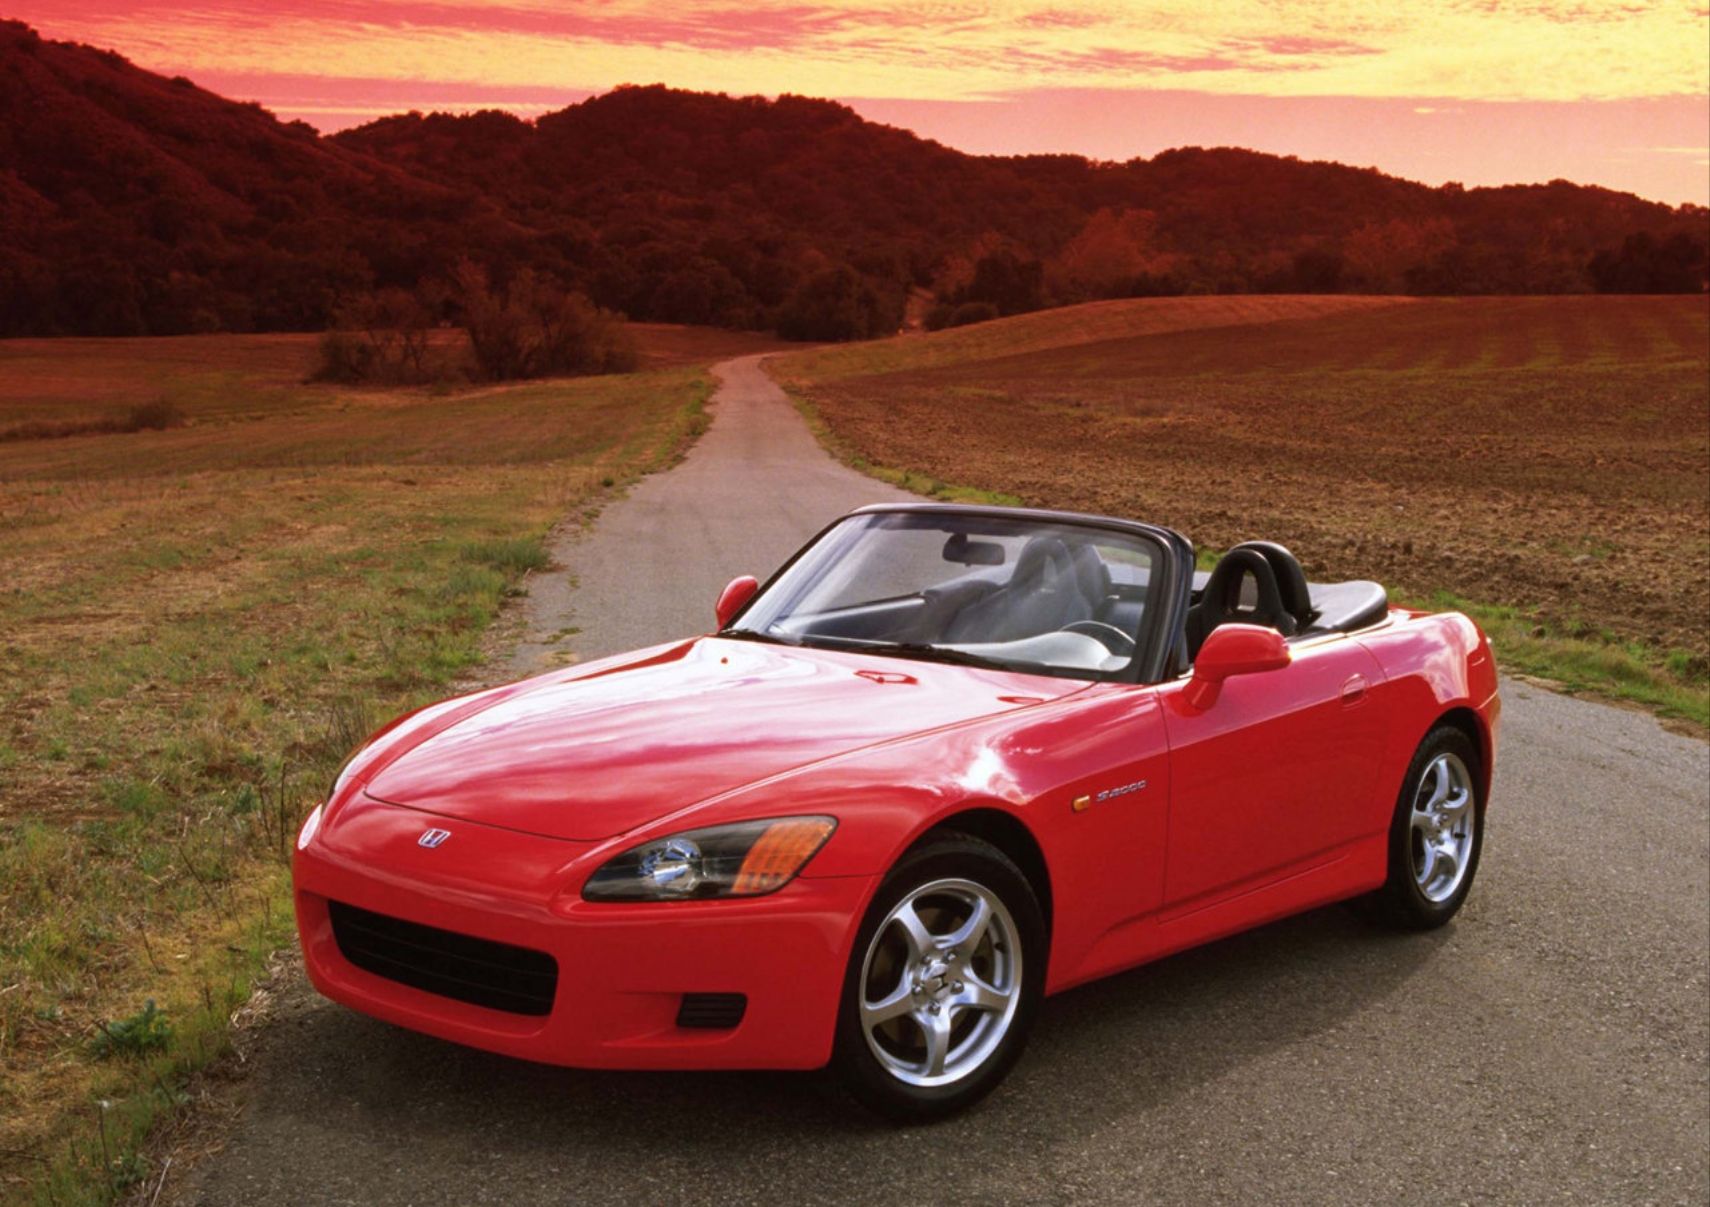 Honda-S2000-2000 Front Quarter View Red